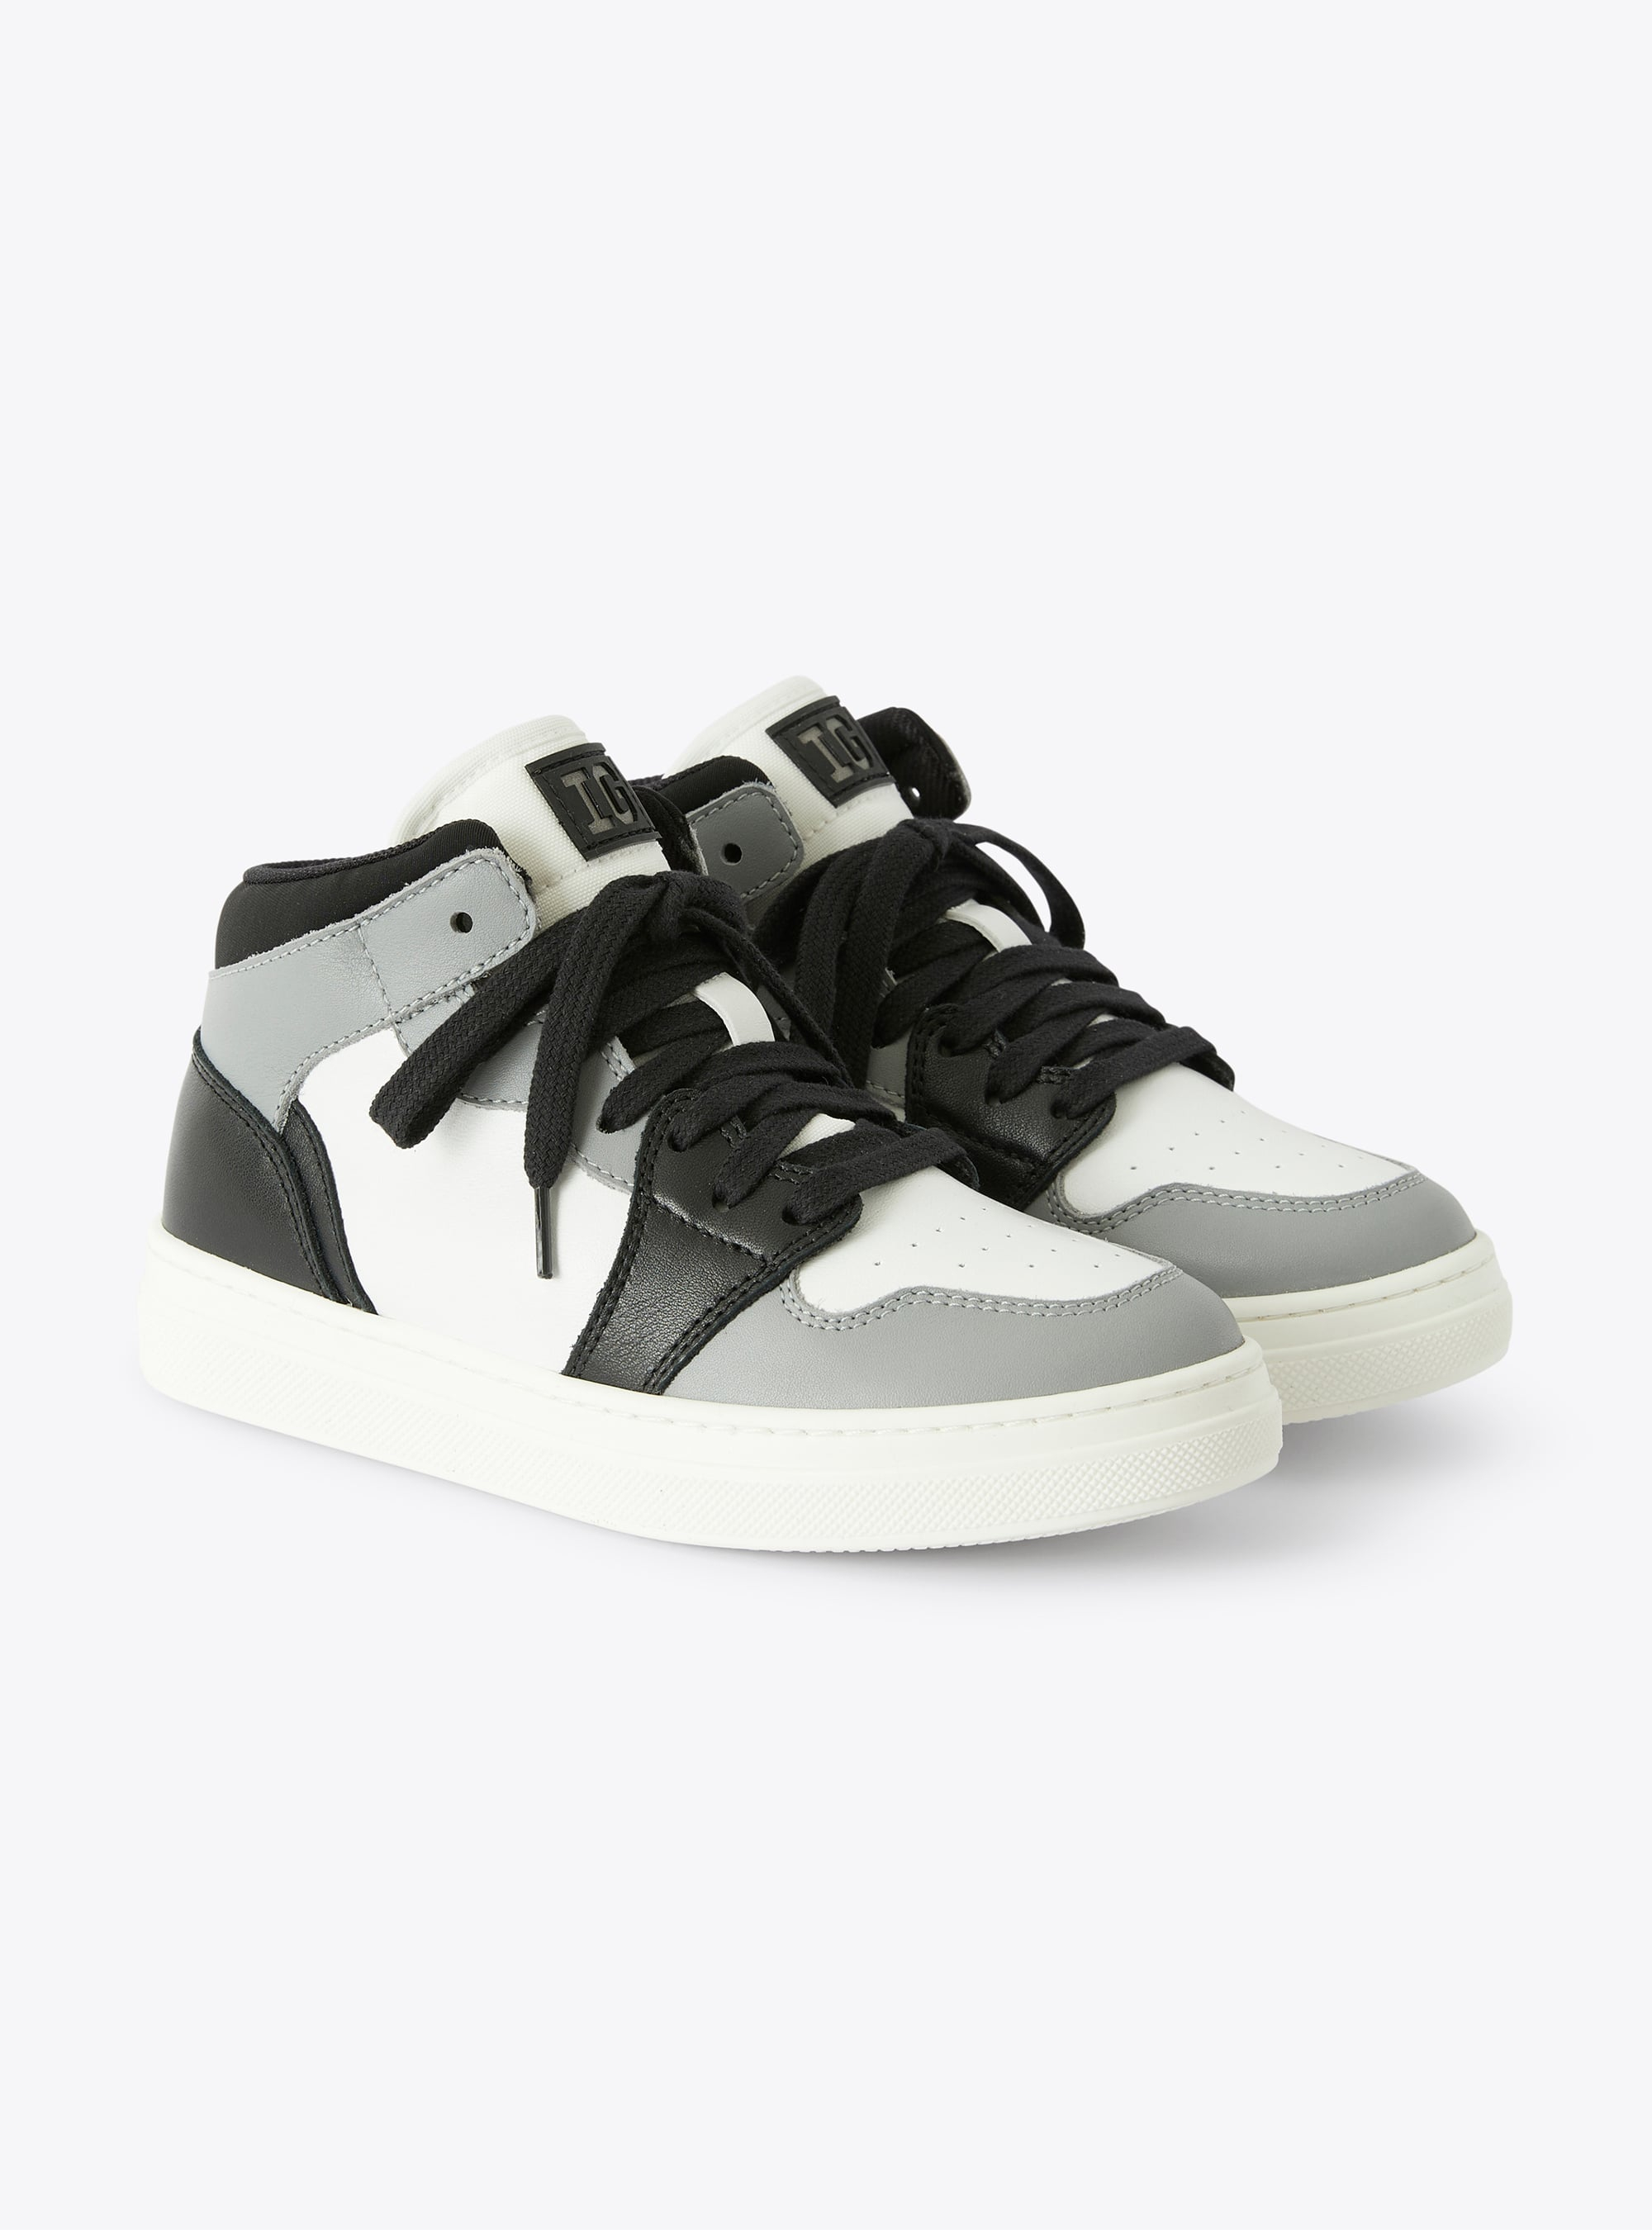 Two-tone high-top sneakers - Shoes - Il Gufo